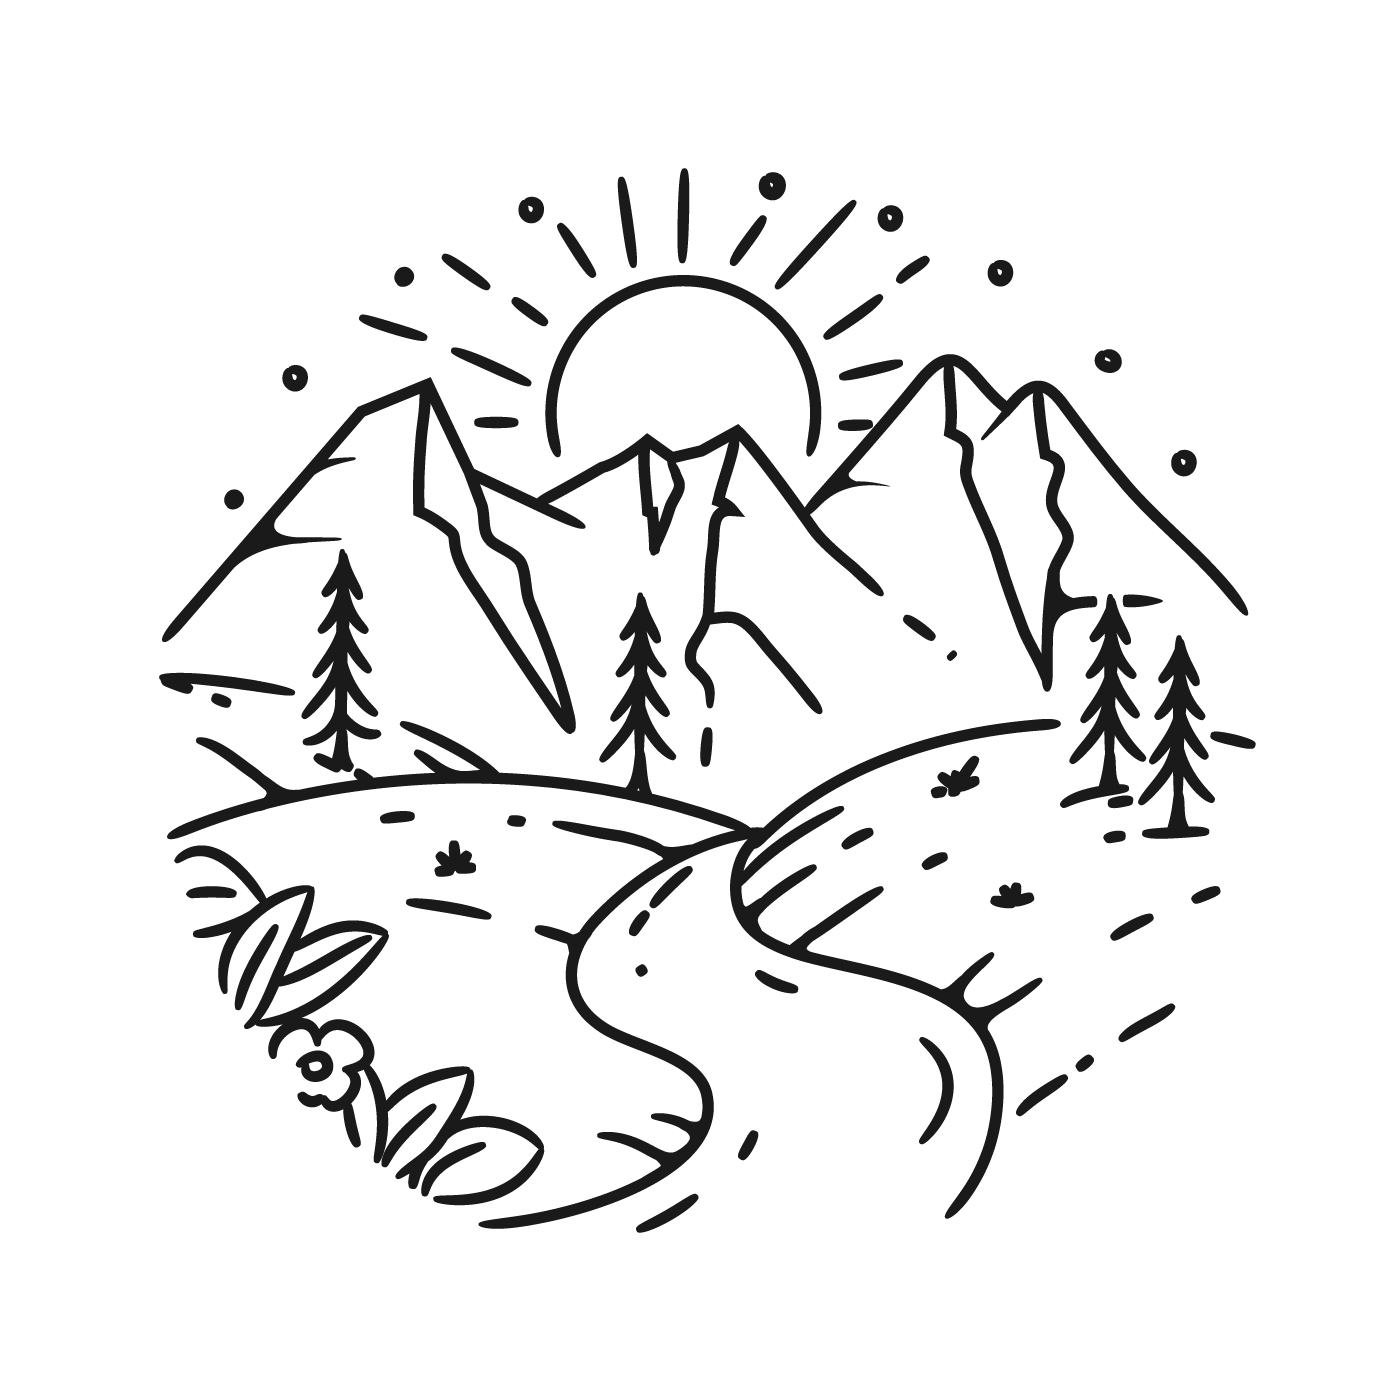 Cliff Mountaineering Graphic Black White Landscape Sketch Illustration  Vector Stock Vector  RoyaltyFree  FreeImages